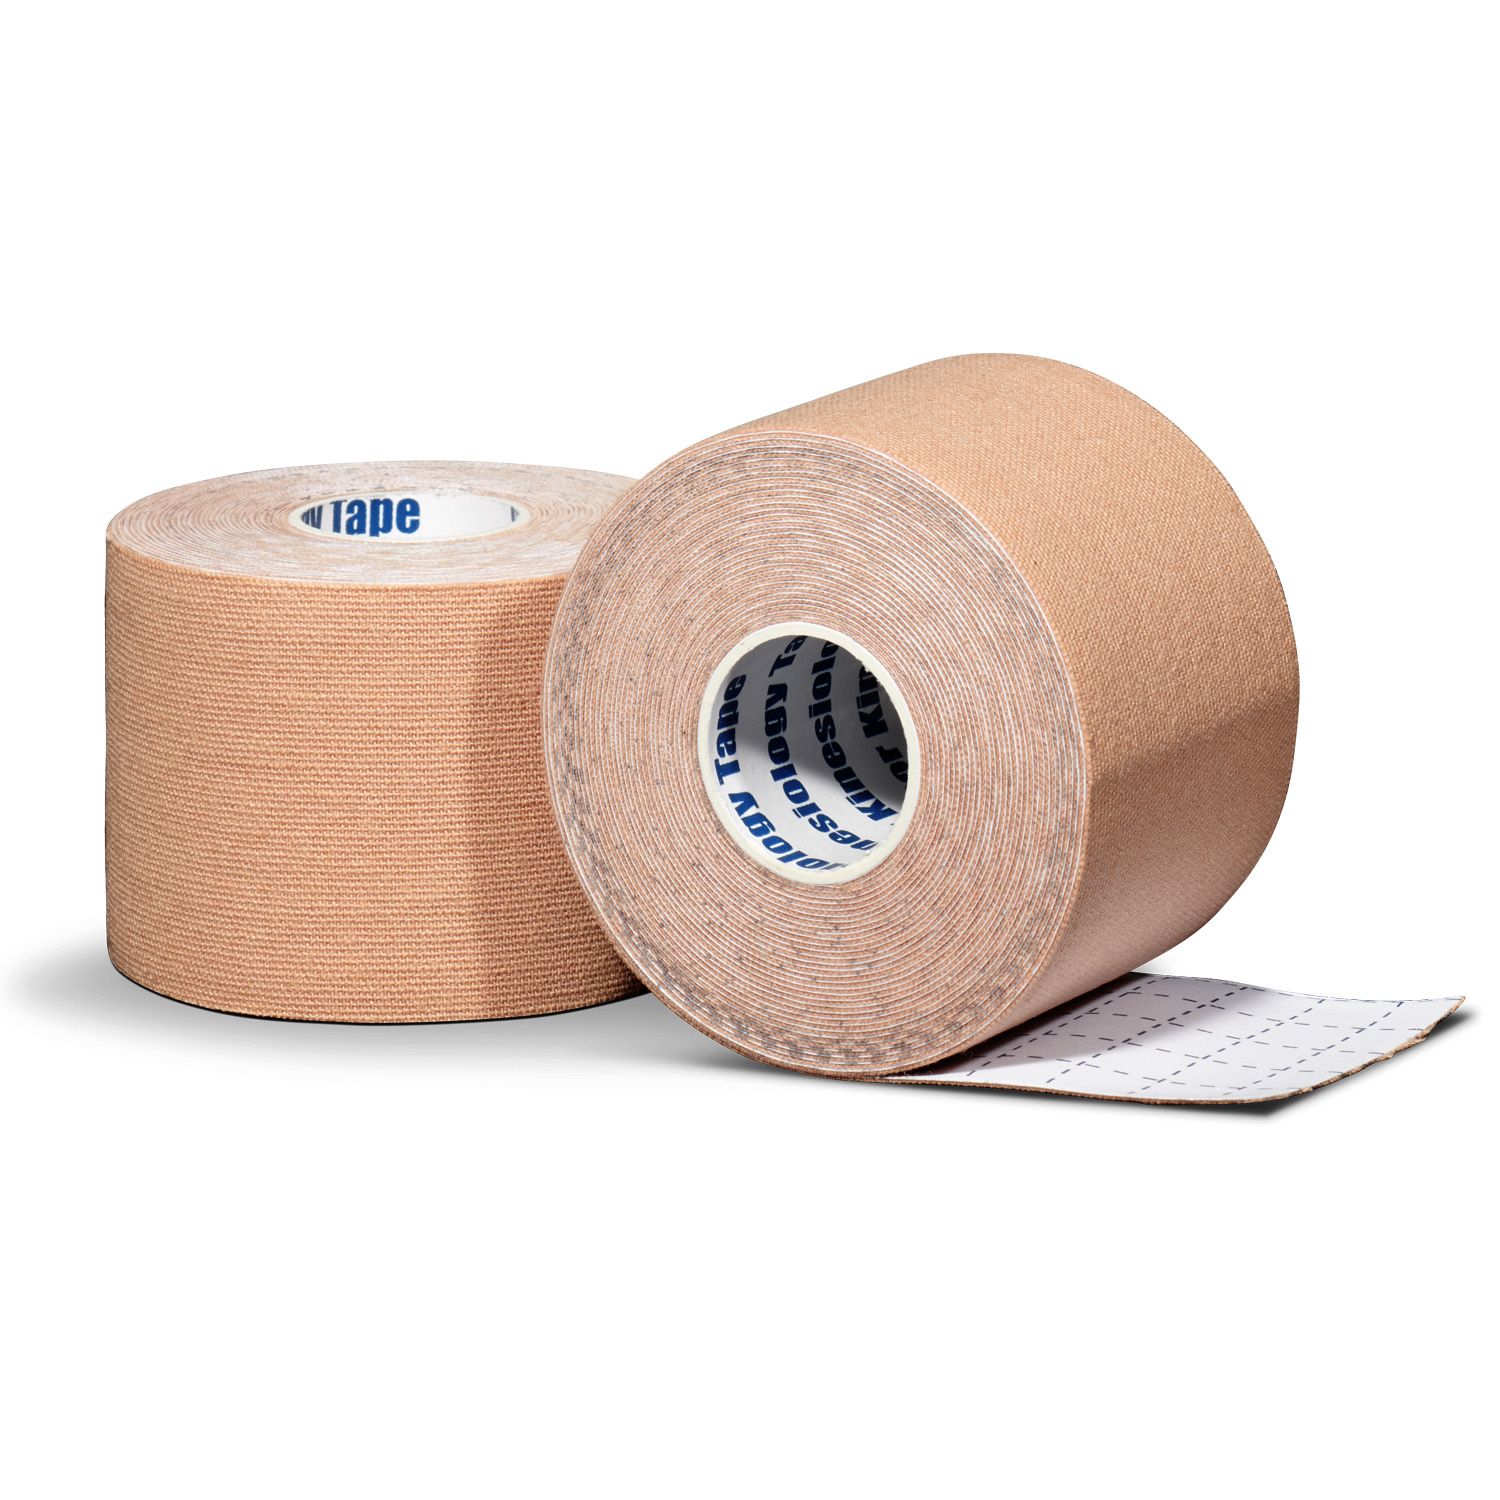 Kinesiology tape per roll skin front and back view